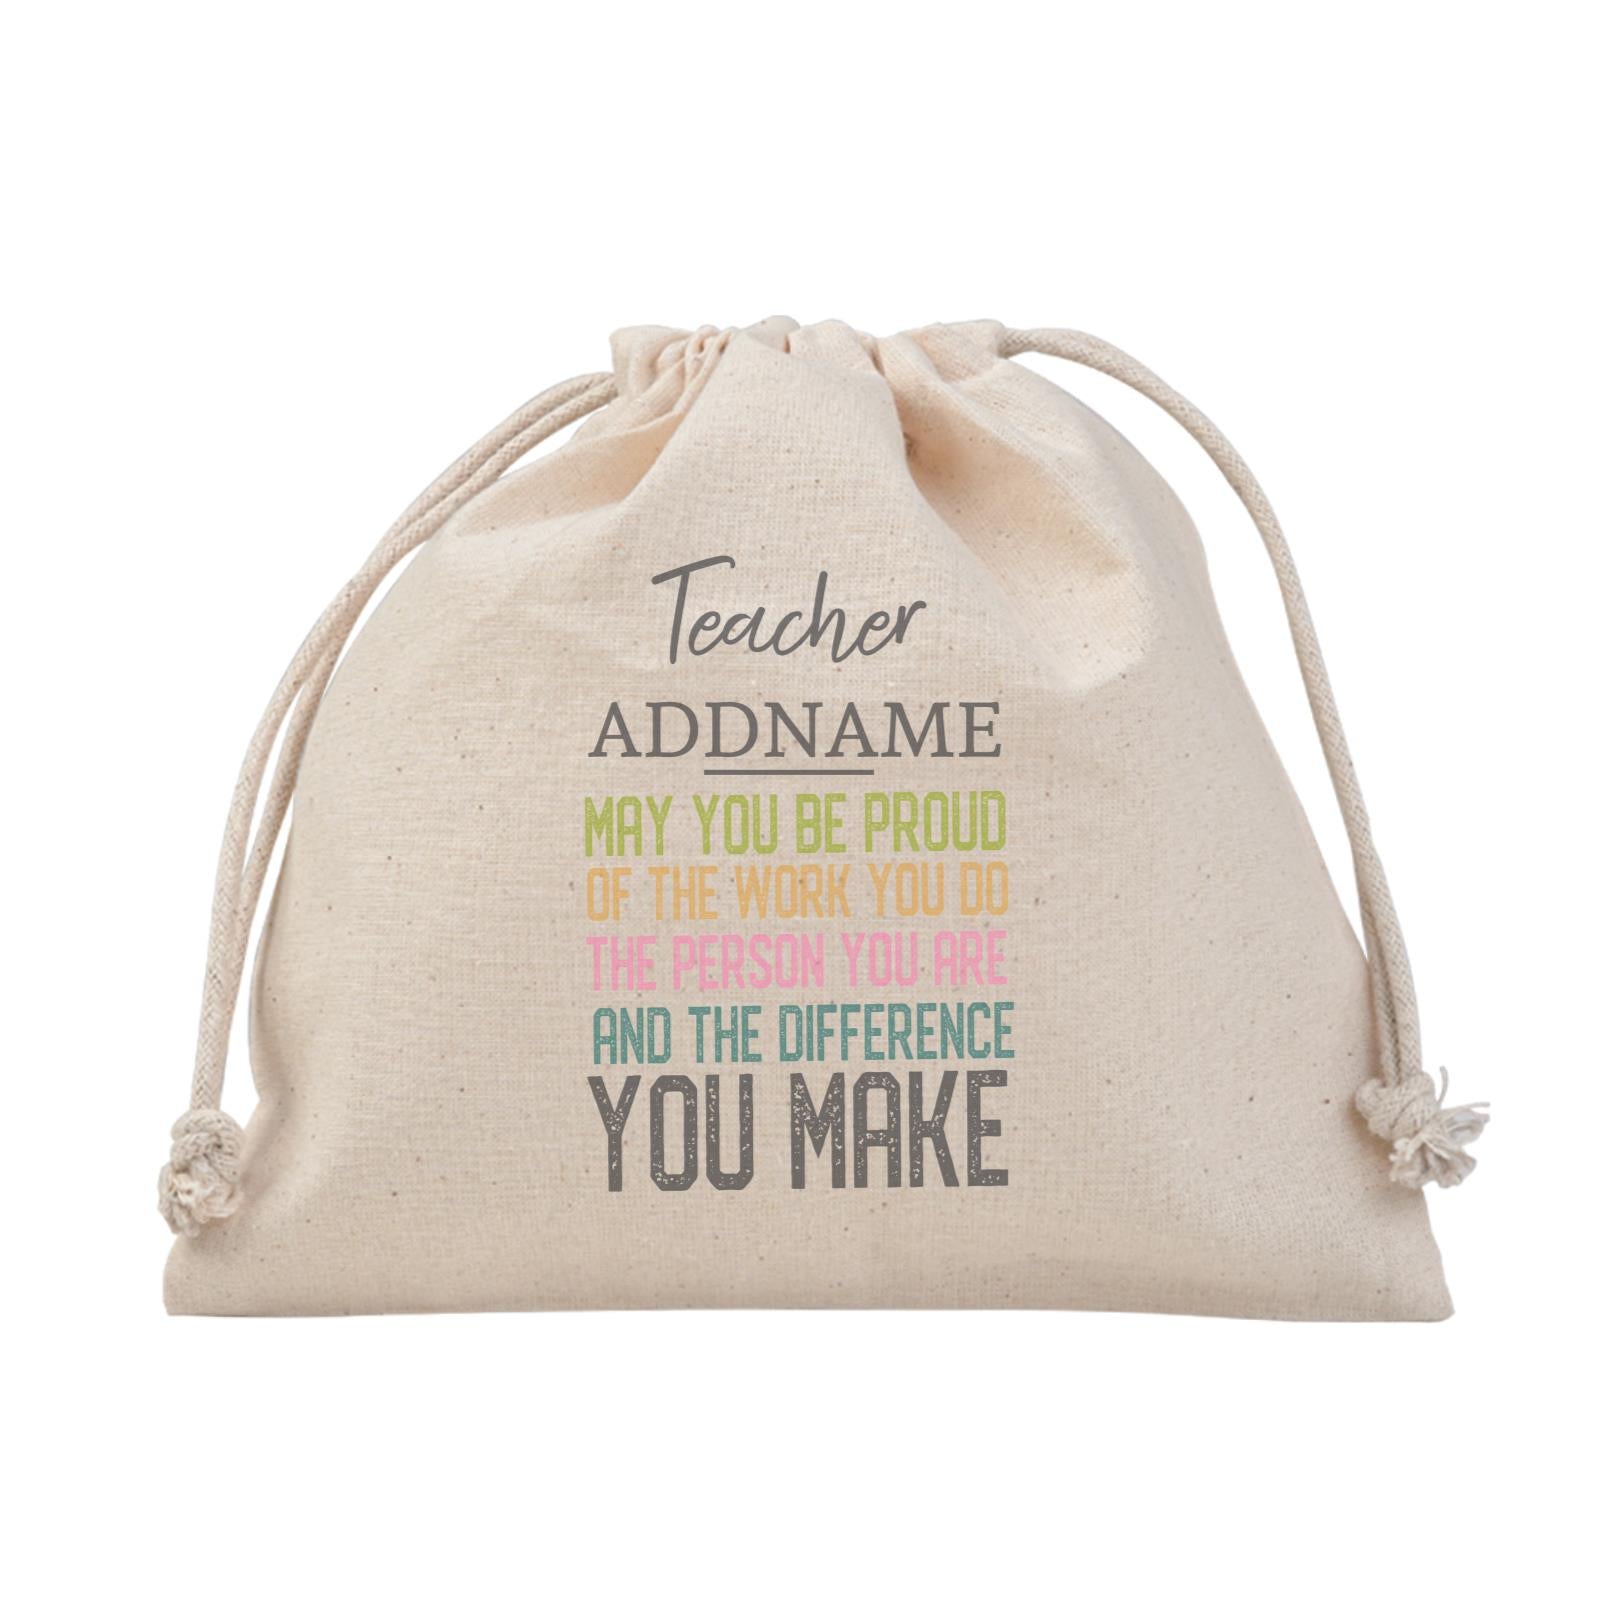 Teacher Addname May You Be Proud And Difference You Make Satchel